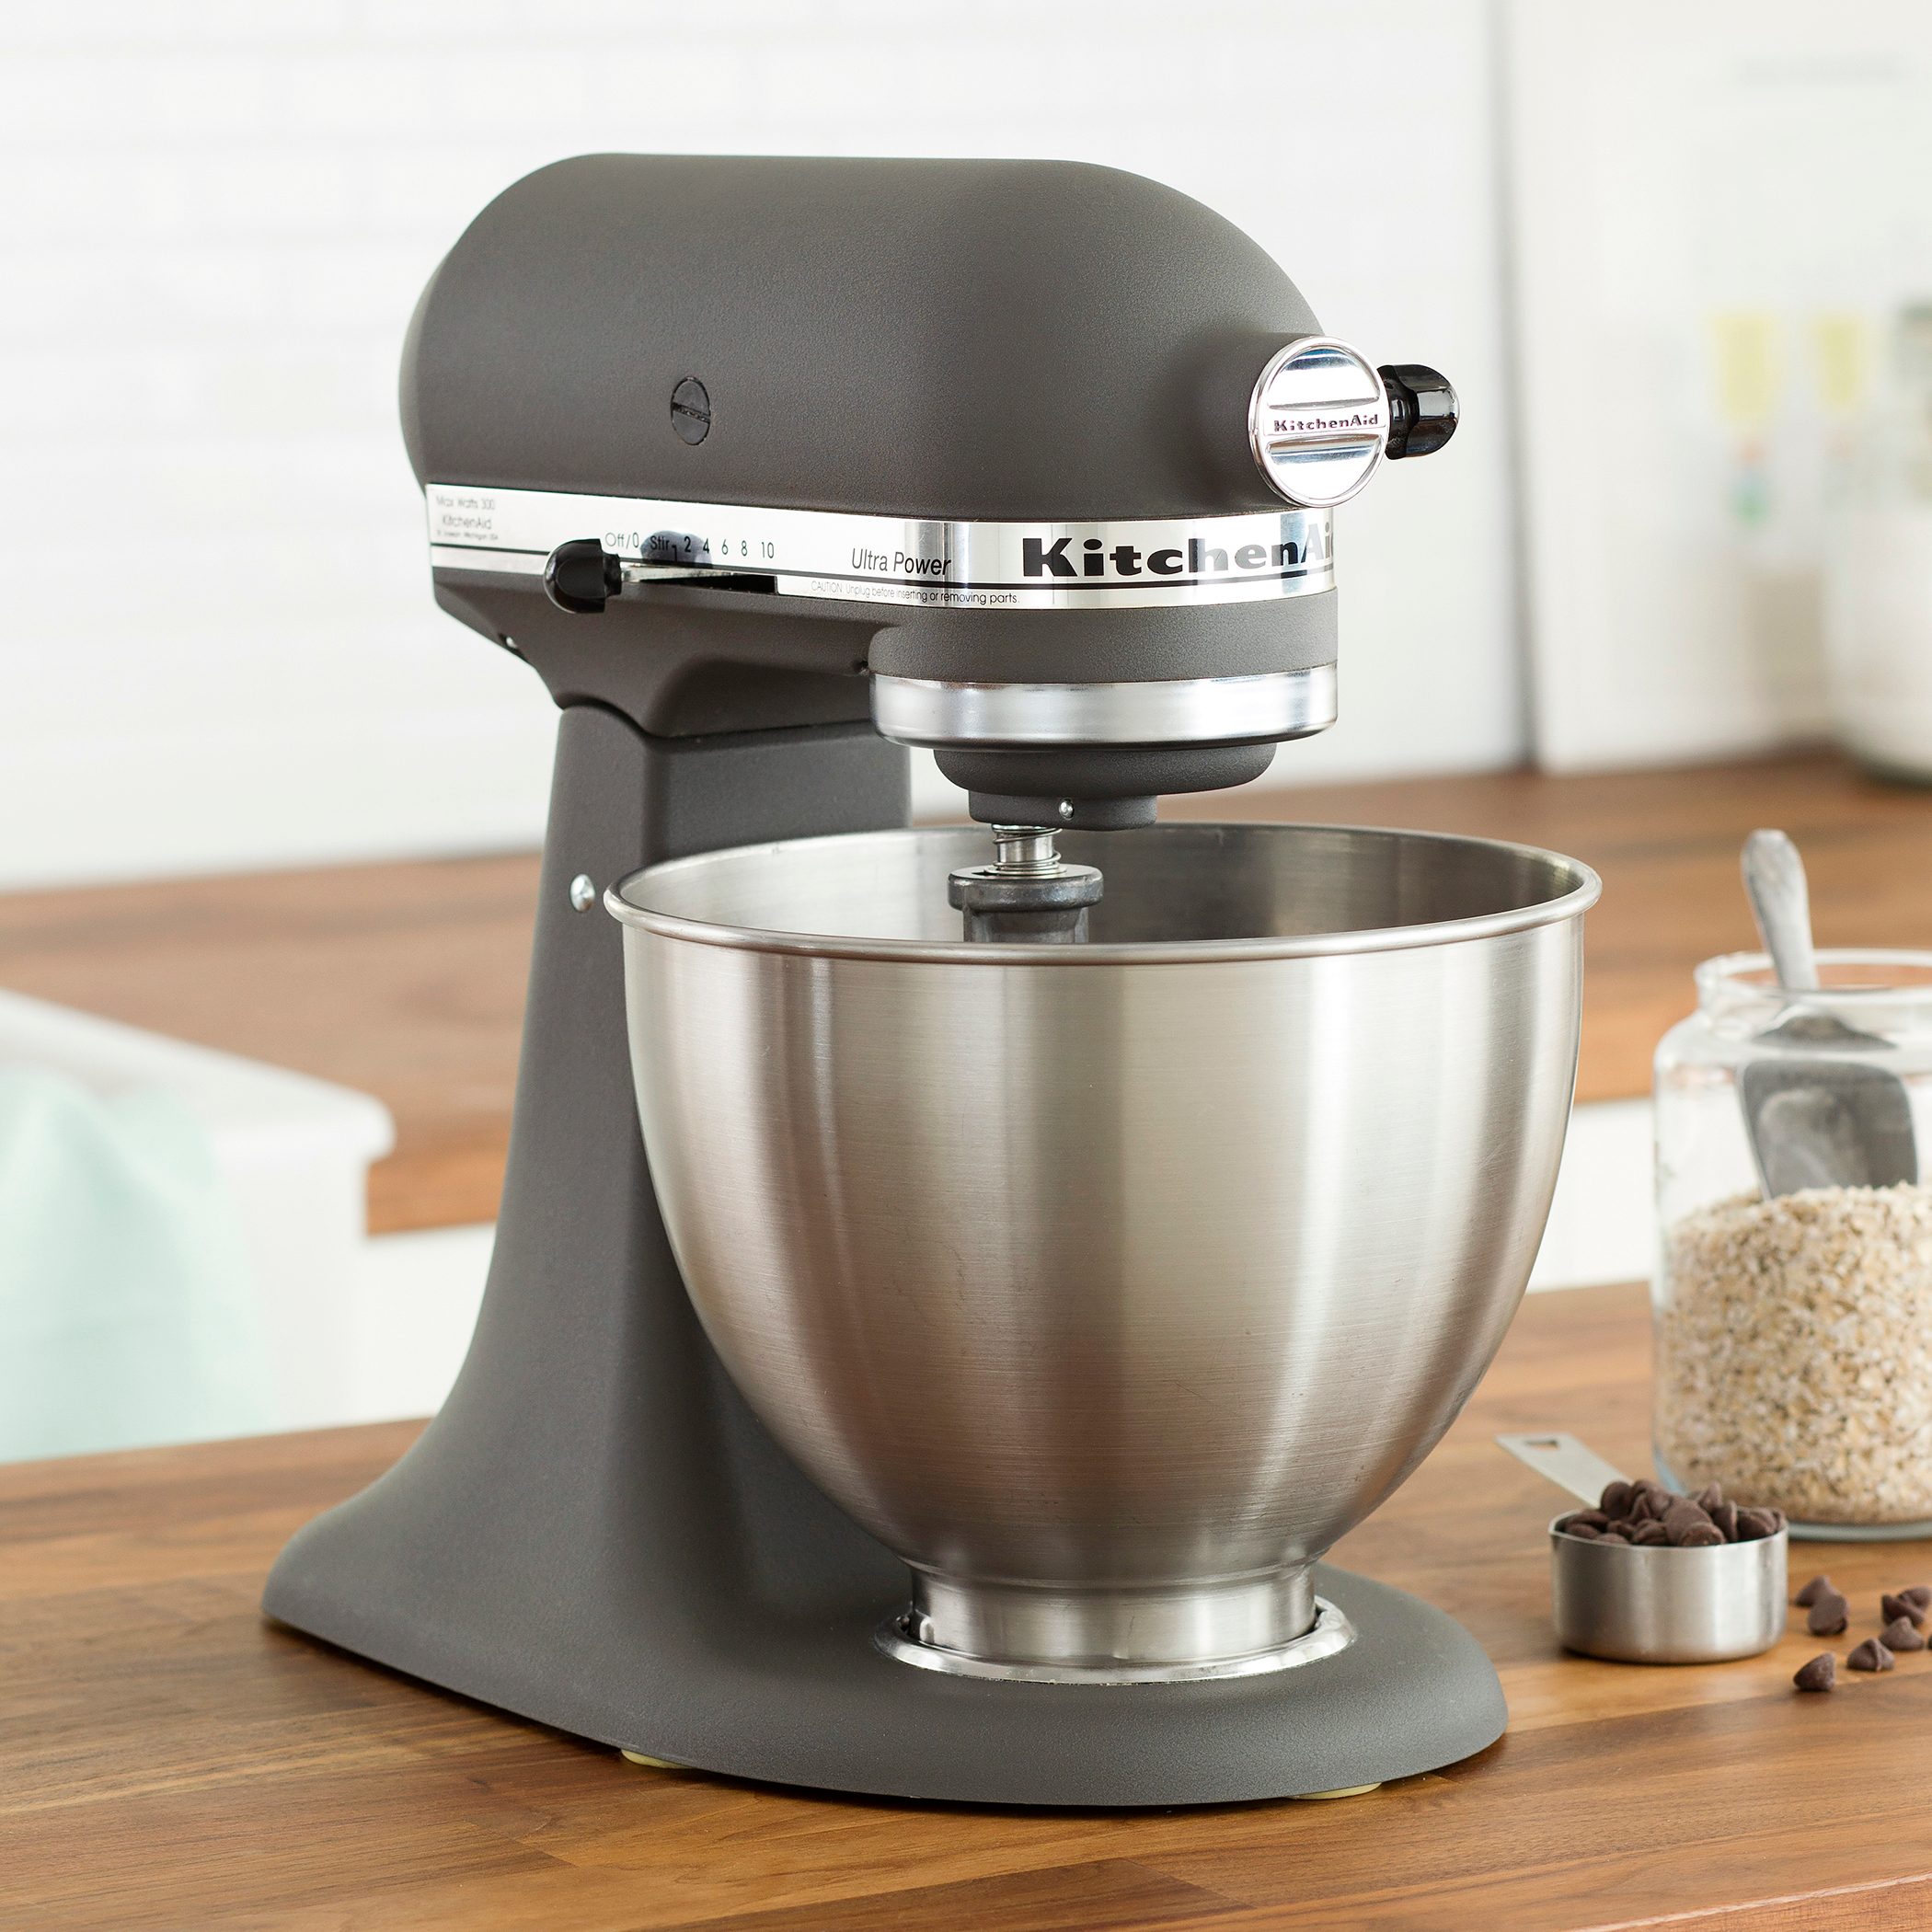 6 Surprising Facts About KitchenAid Mixers